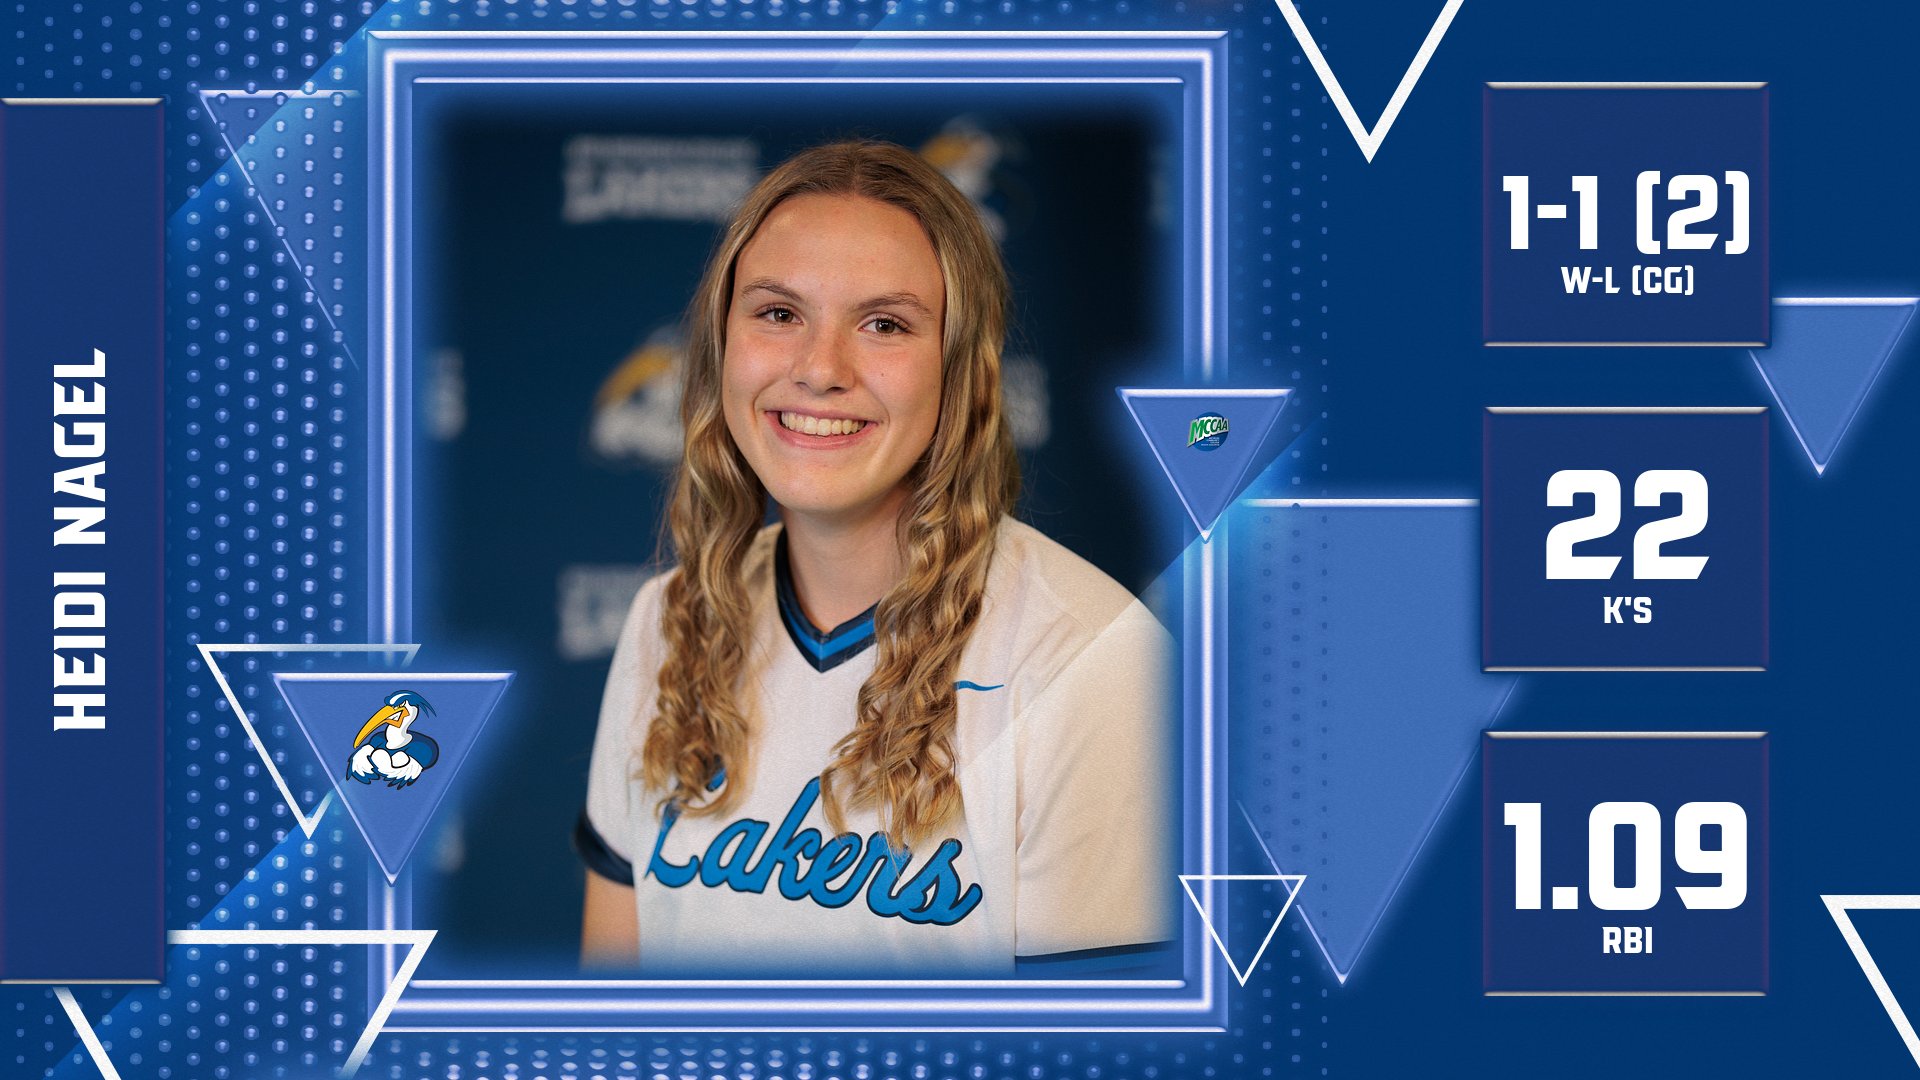 Heidi Nagel, MCCAA Northern Conference Softball Pitcher of the Week, Mid Michigan College